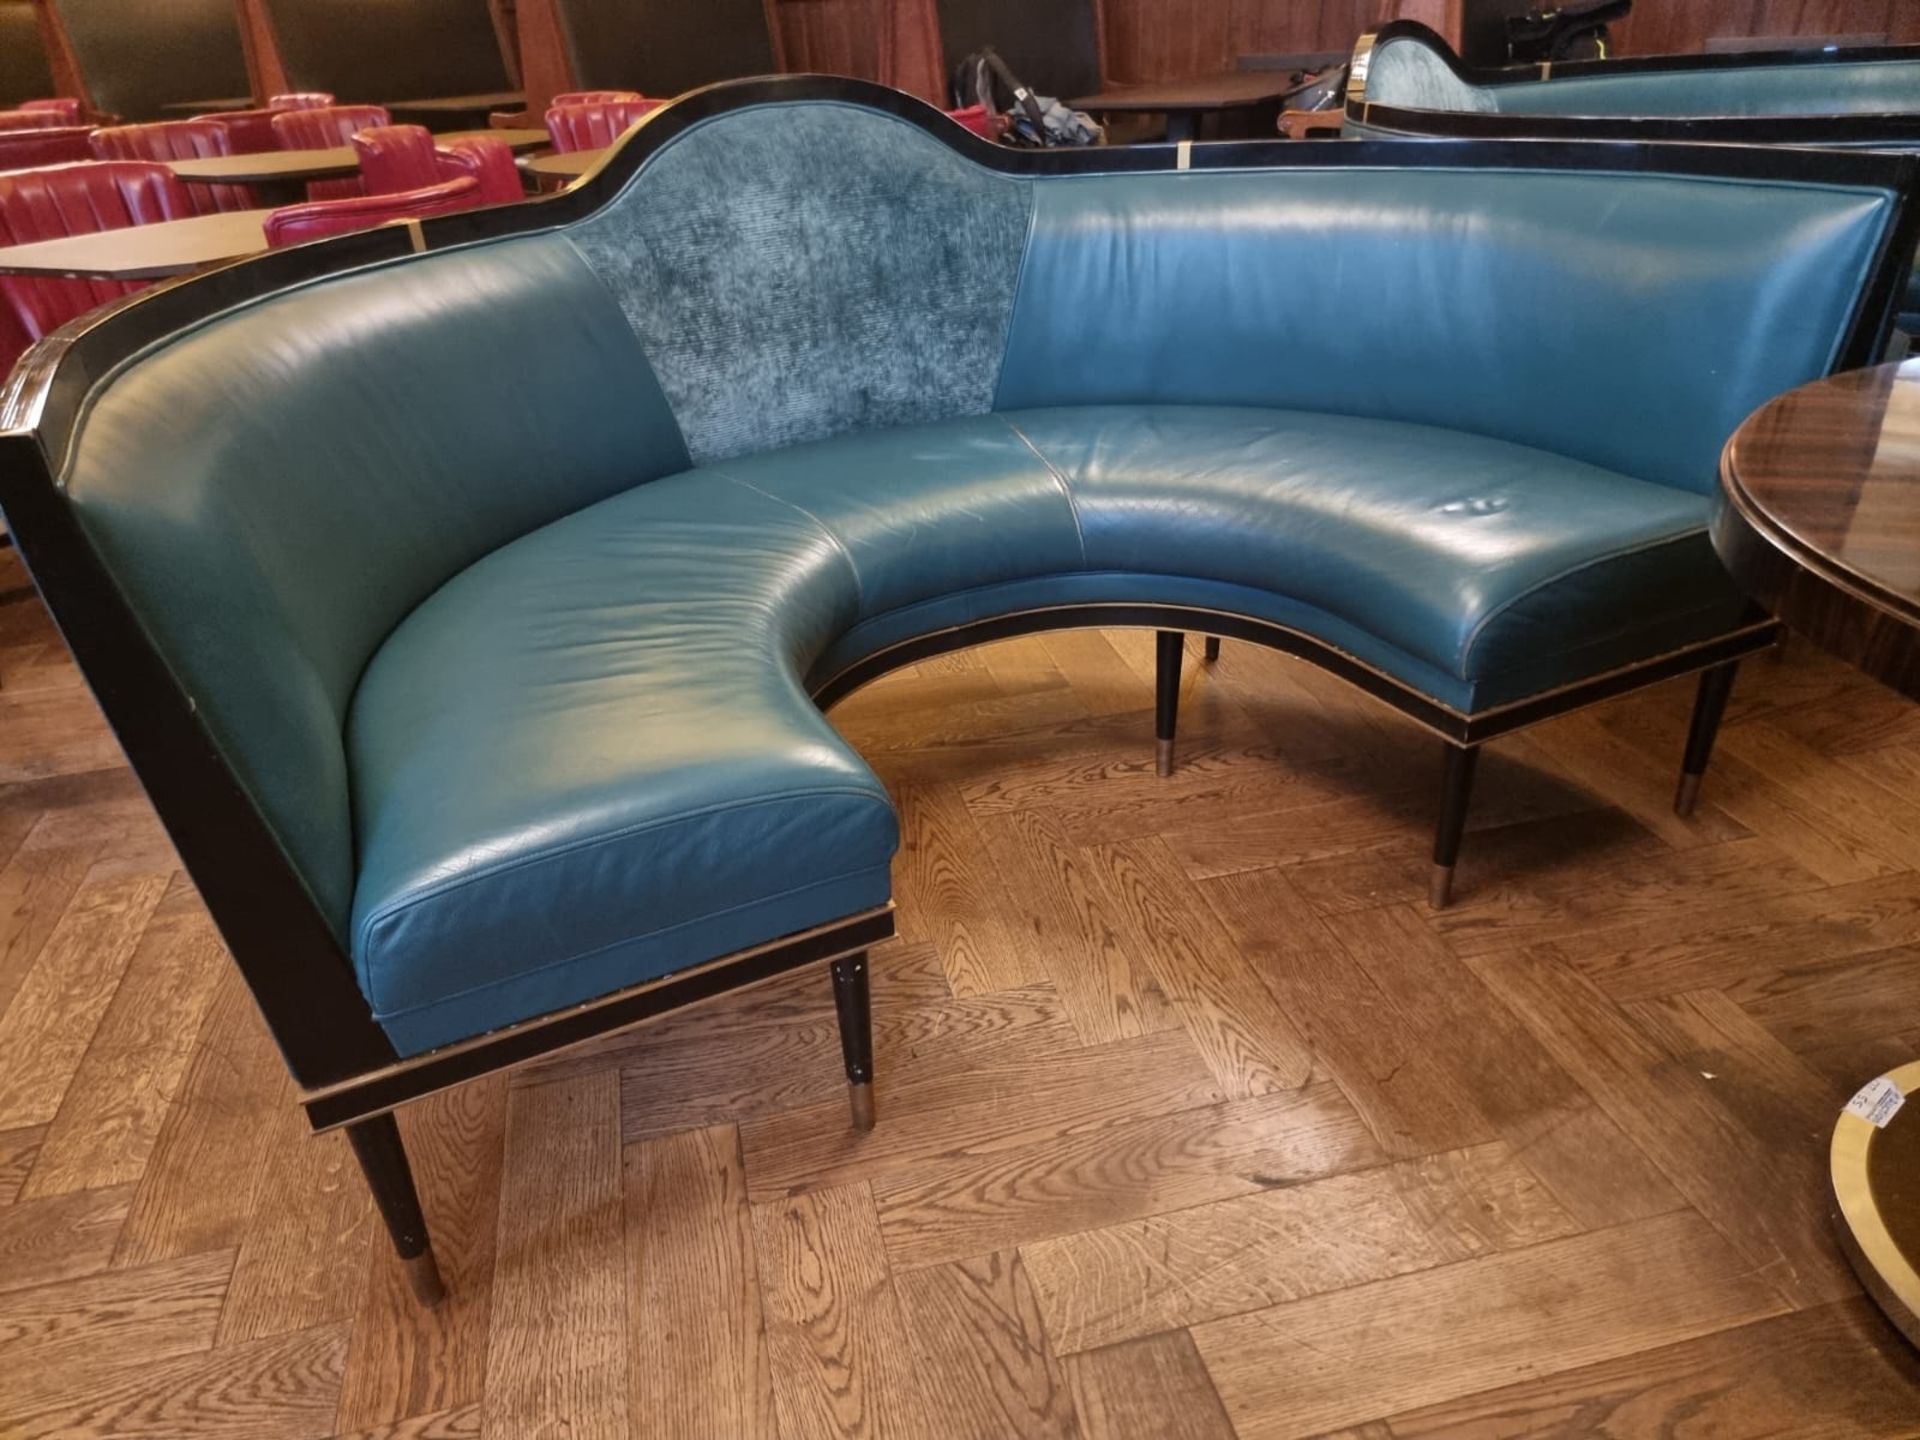 A  bespoke Robert Angell tufted leather banquette upholstered Circular Banquette Bench On Spindle - Image 3 of 3